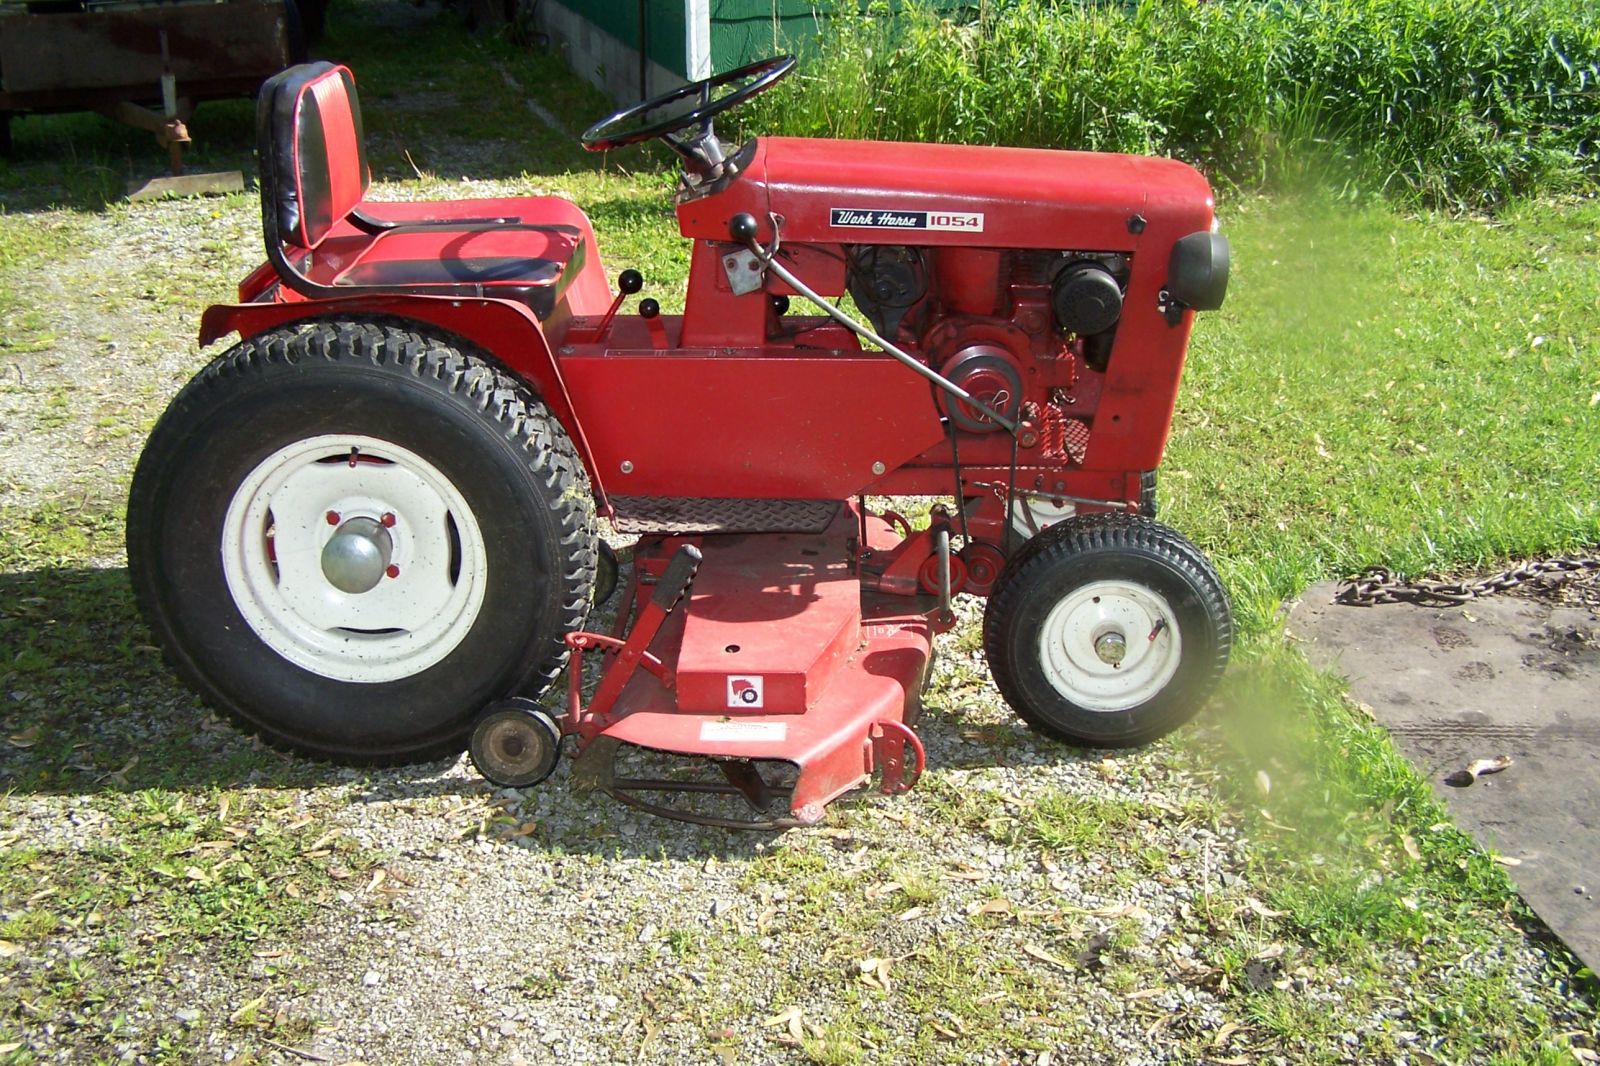 1964 Wheel Horse 1054 Tractor With 48 Inch Mower Deck 1955 1964